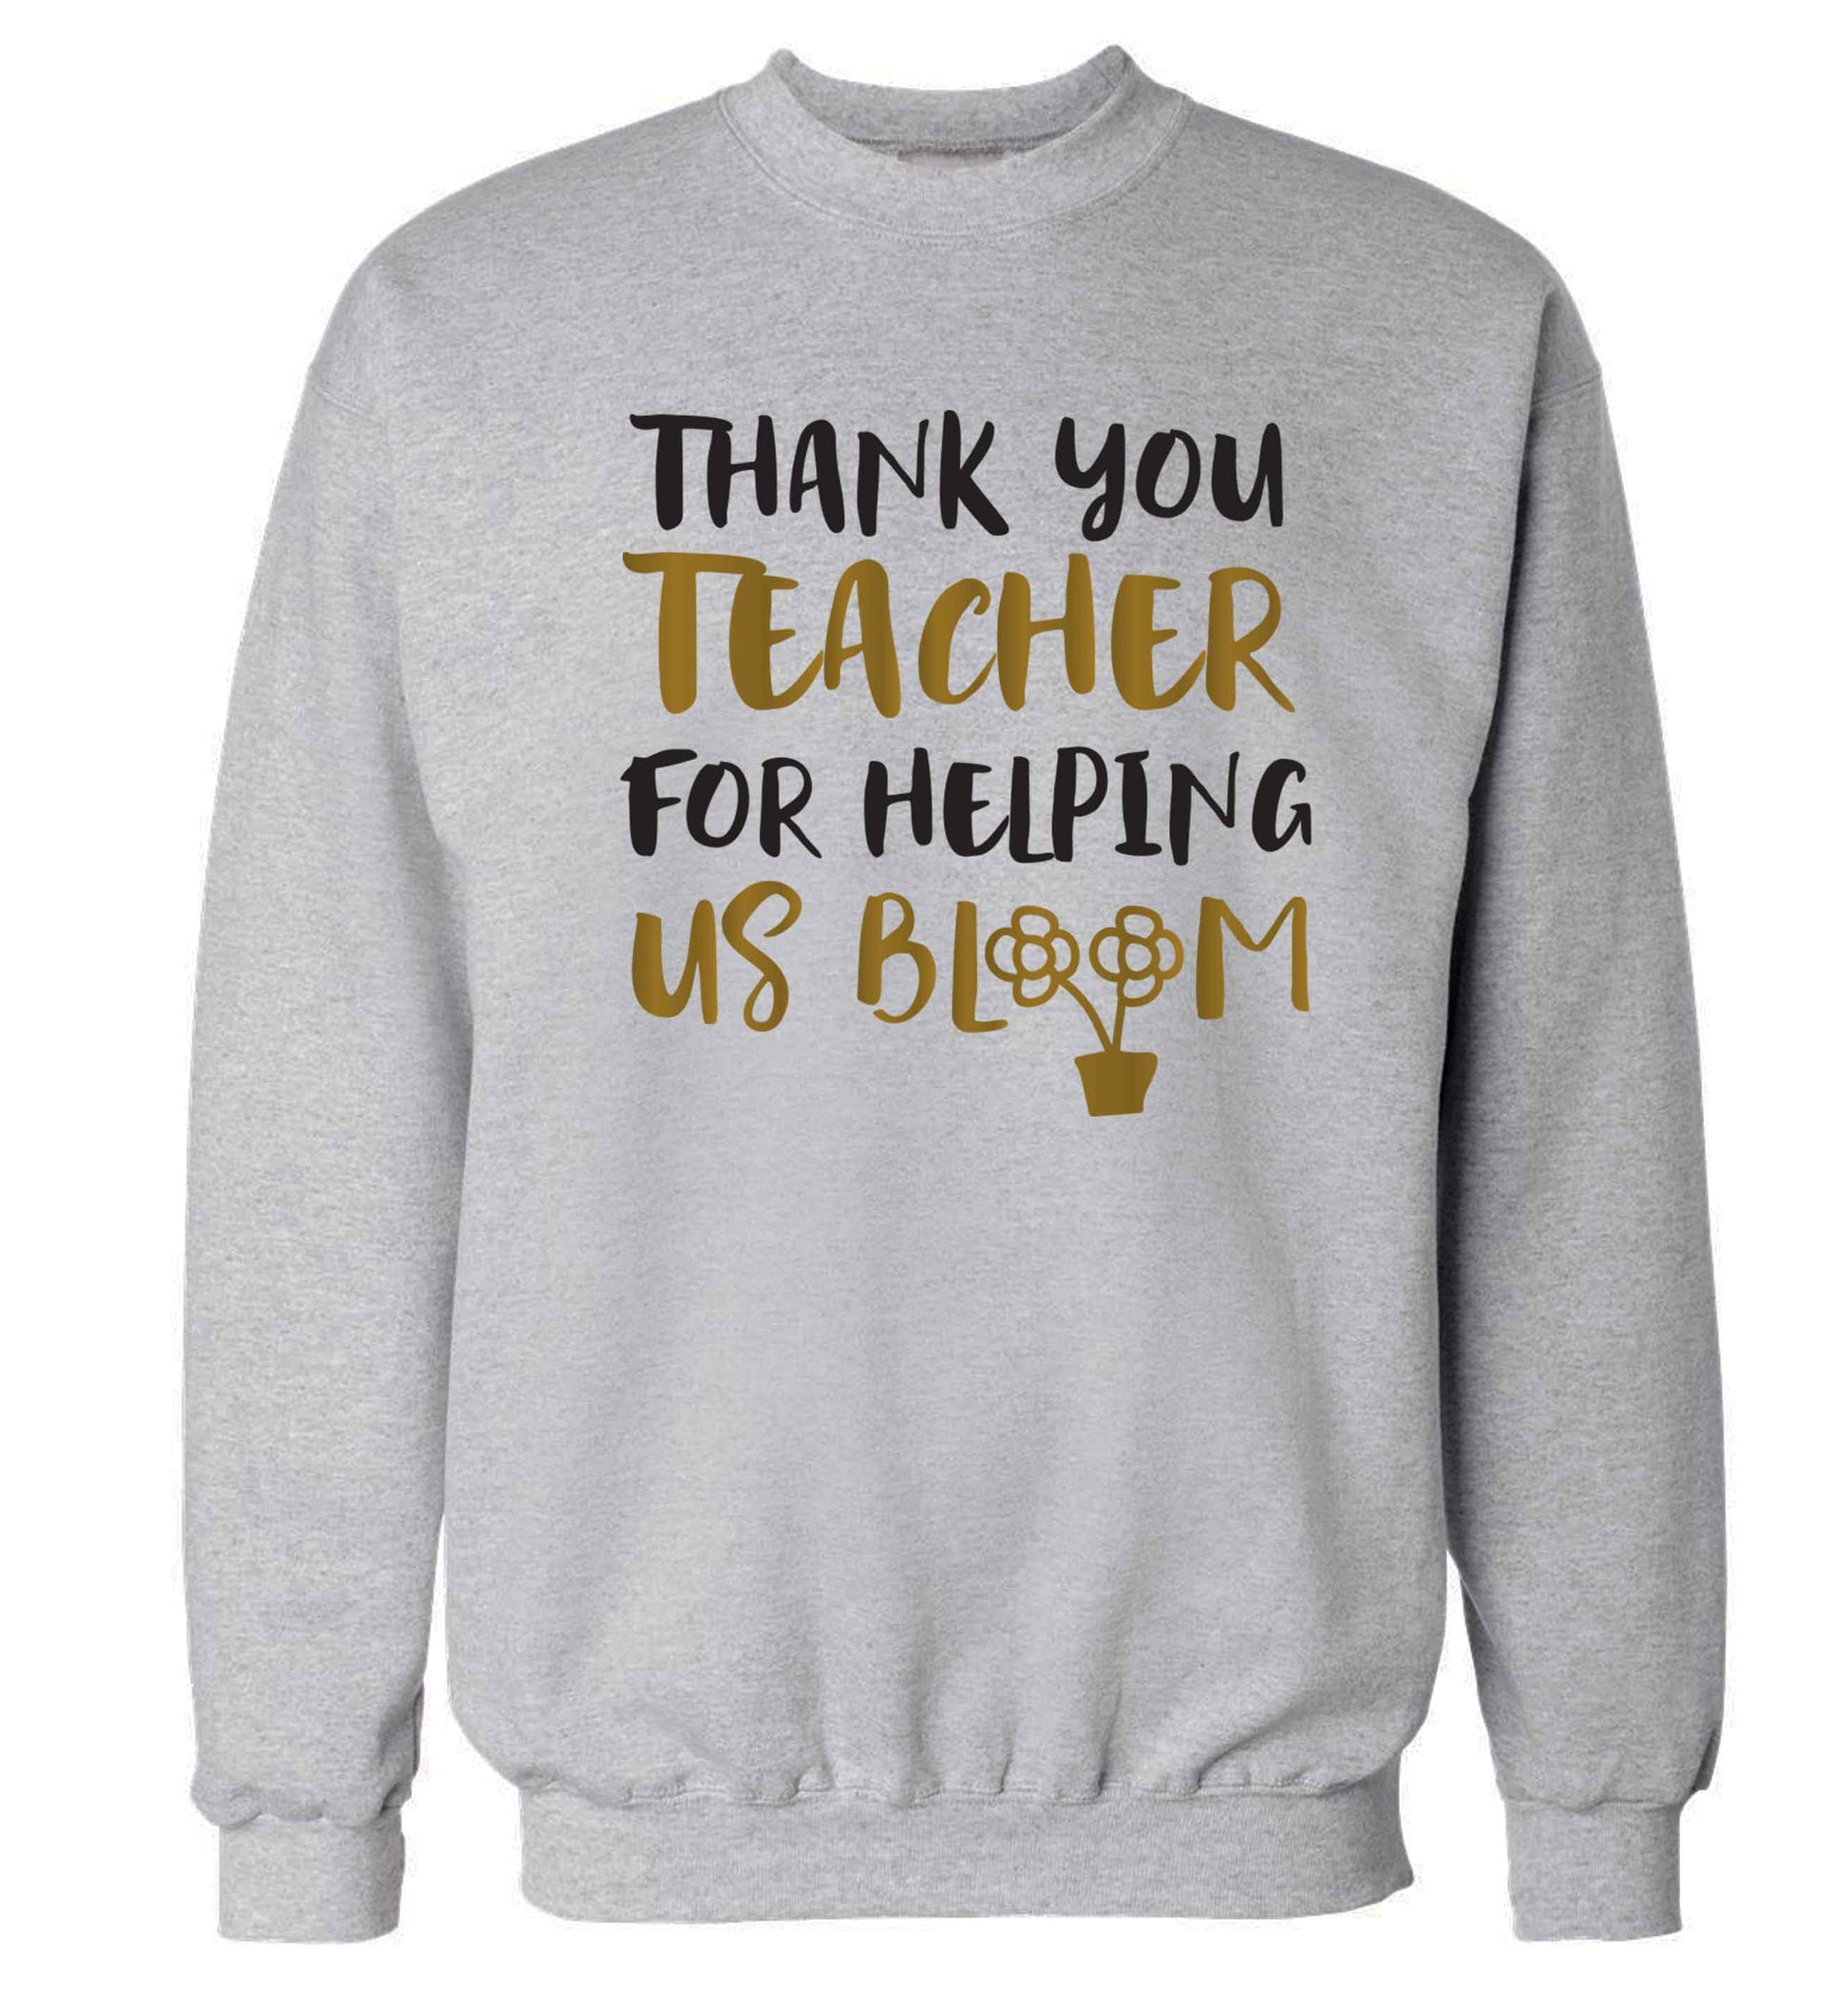 Thank you teacher for helping us bloom Adult's unisex grey Sweater 2XL